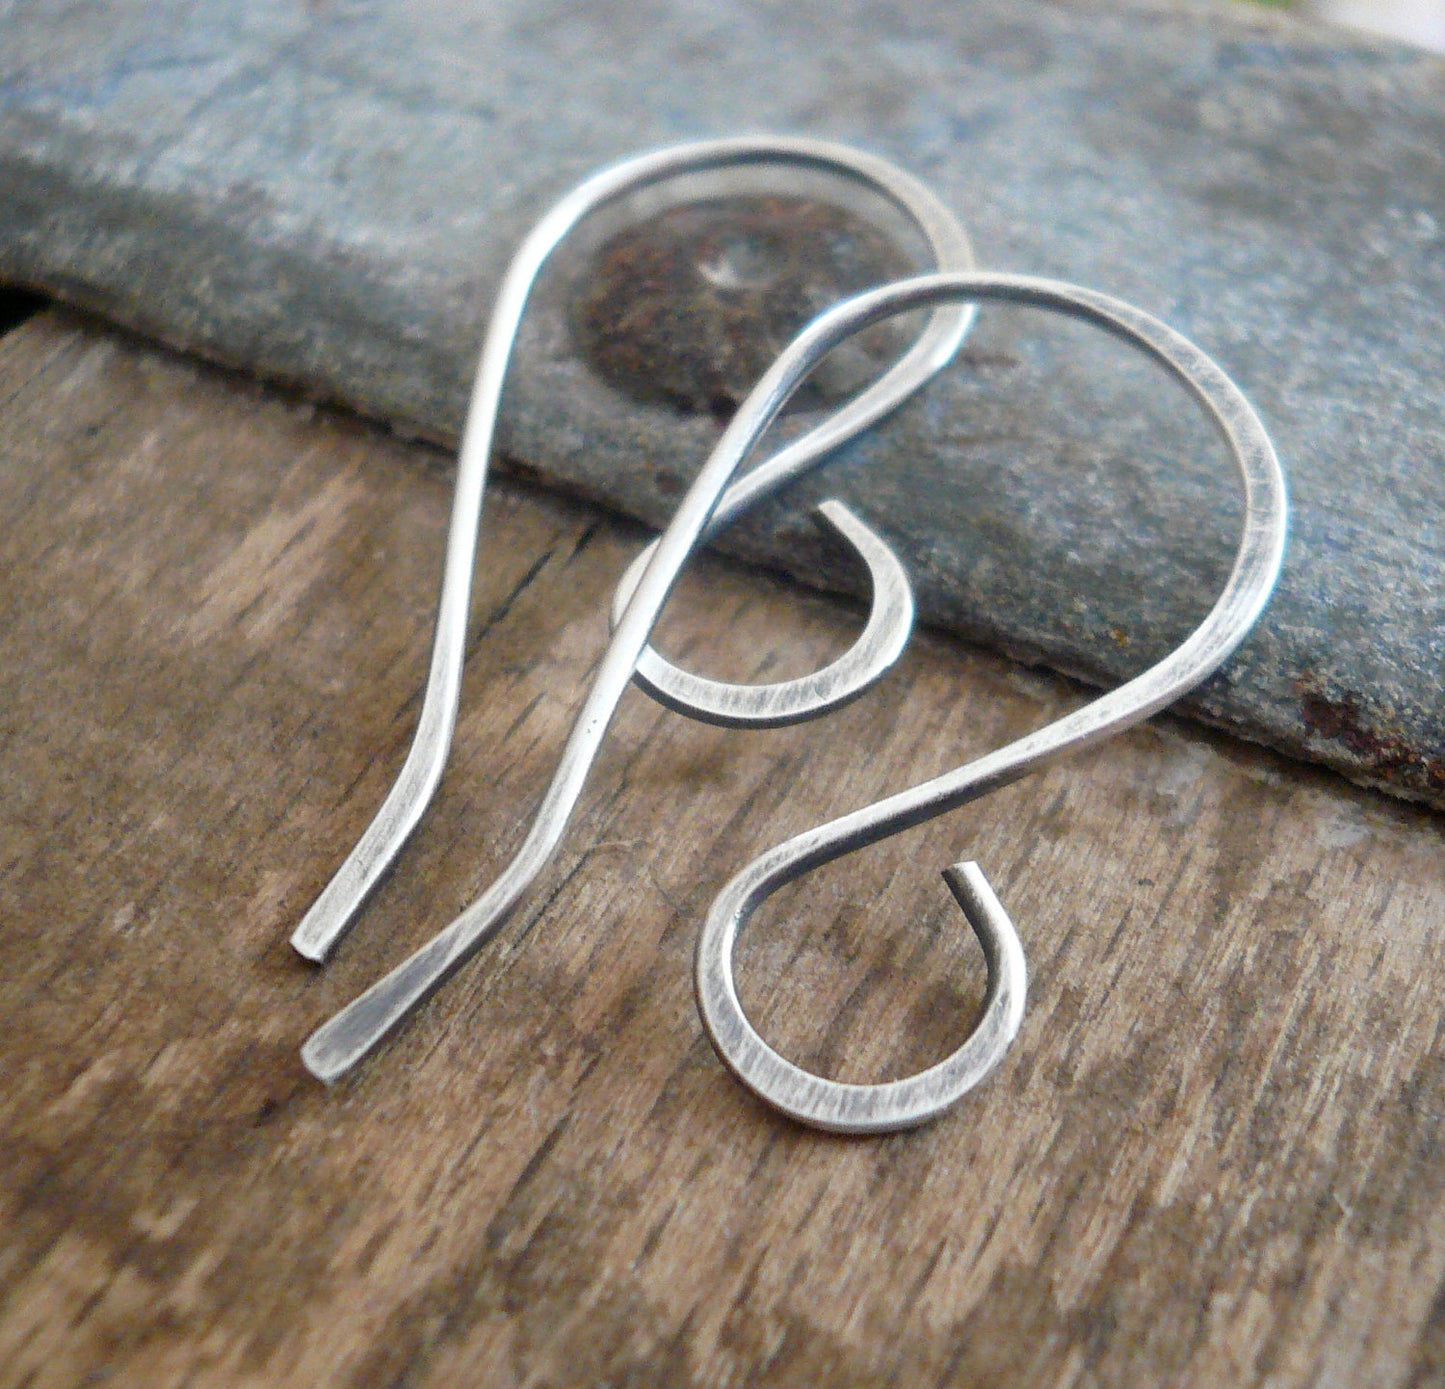 12 Pairs of my Large Loop Solitaire Sterling Silver Earwires - Handmade. Handforged. Oxidized & Polished